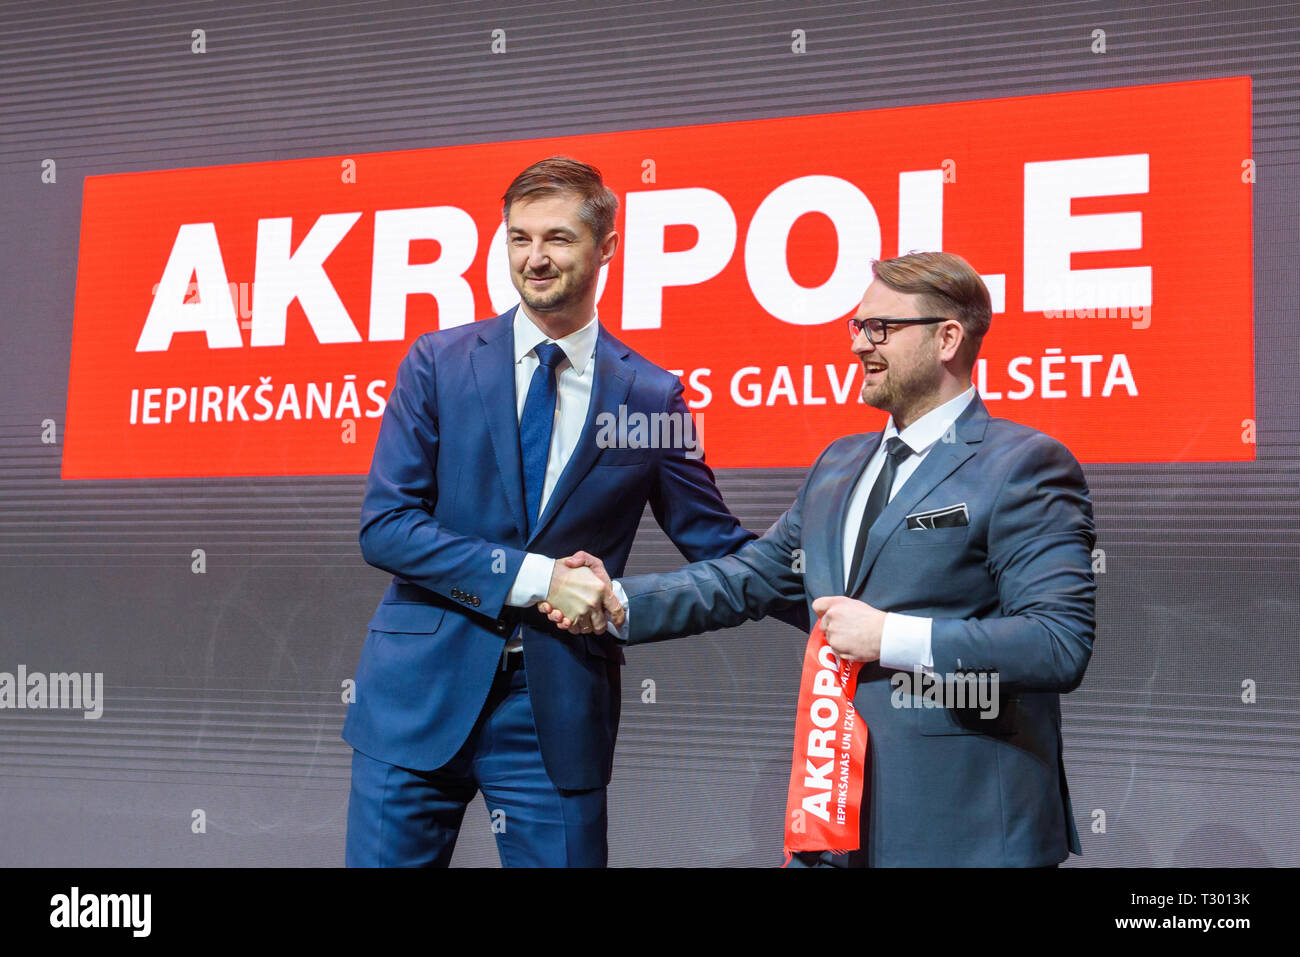 04.04.2019. RIGA, LATVIA.  Vytautas Labeckas CEO of Akropolis and Kaspars Beitins, CEO of SIA AKROPOLE RIGA  with red lente, during Akropole shopping  Stock Photo